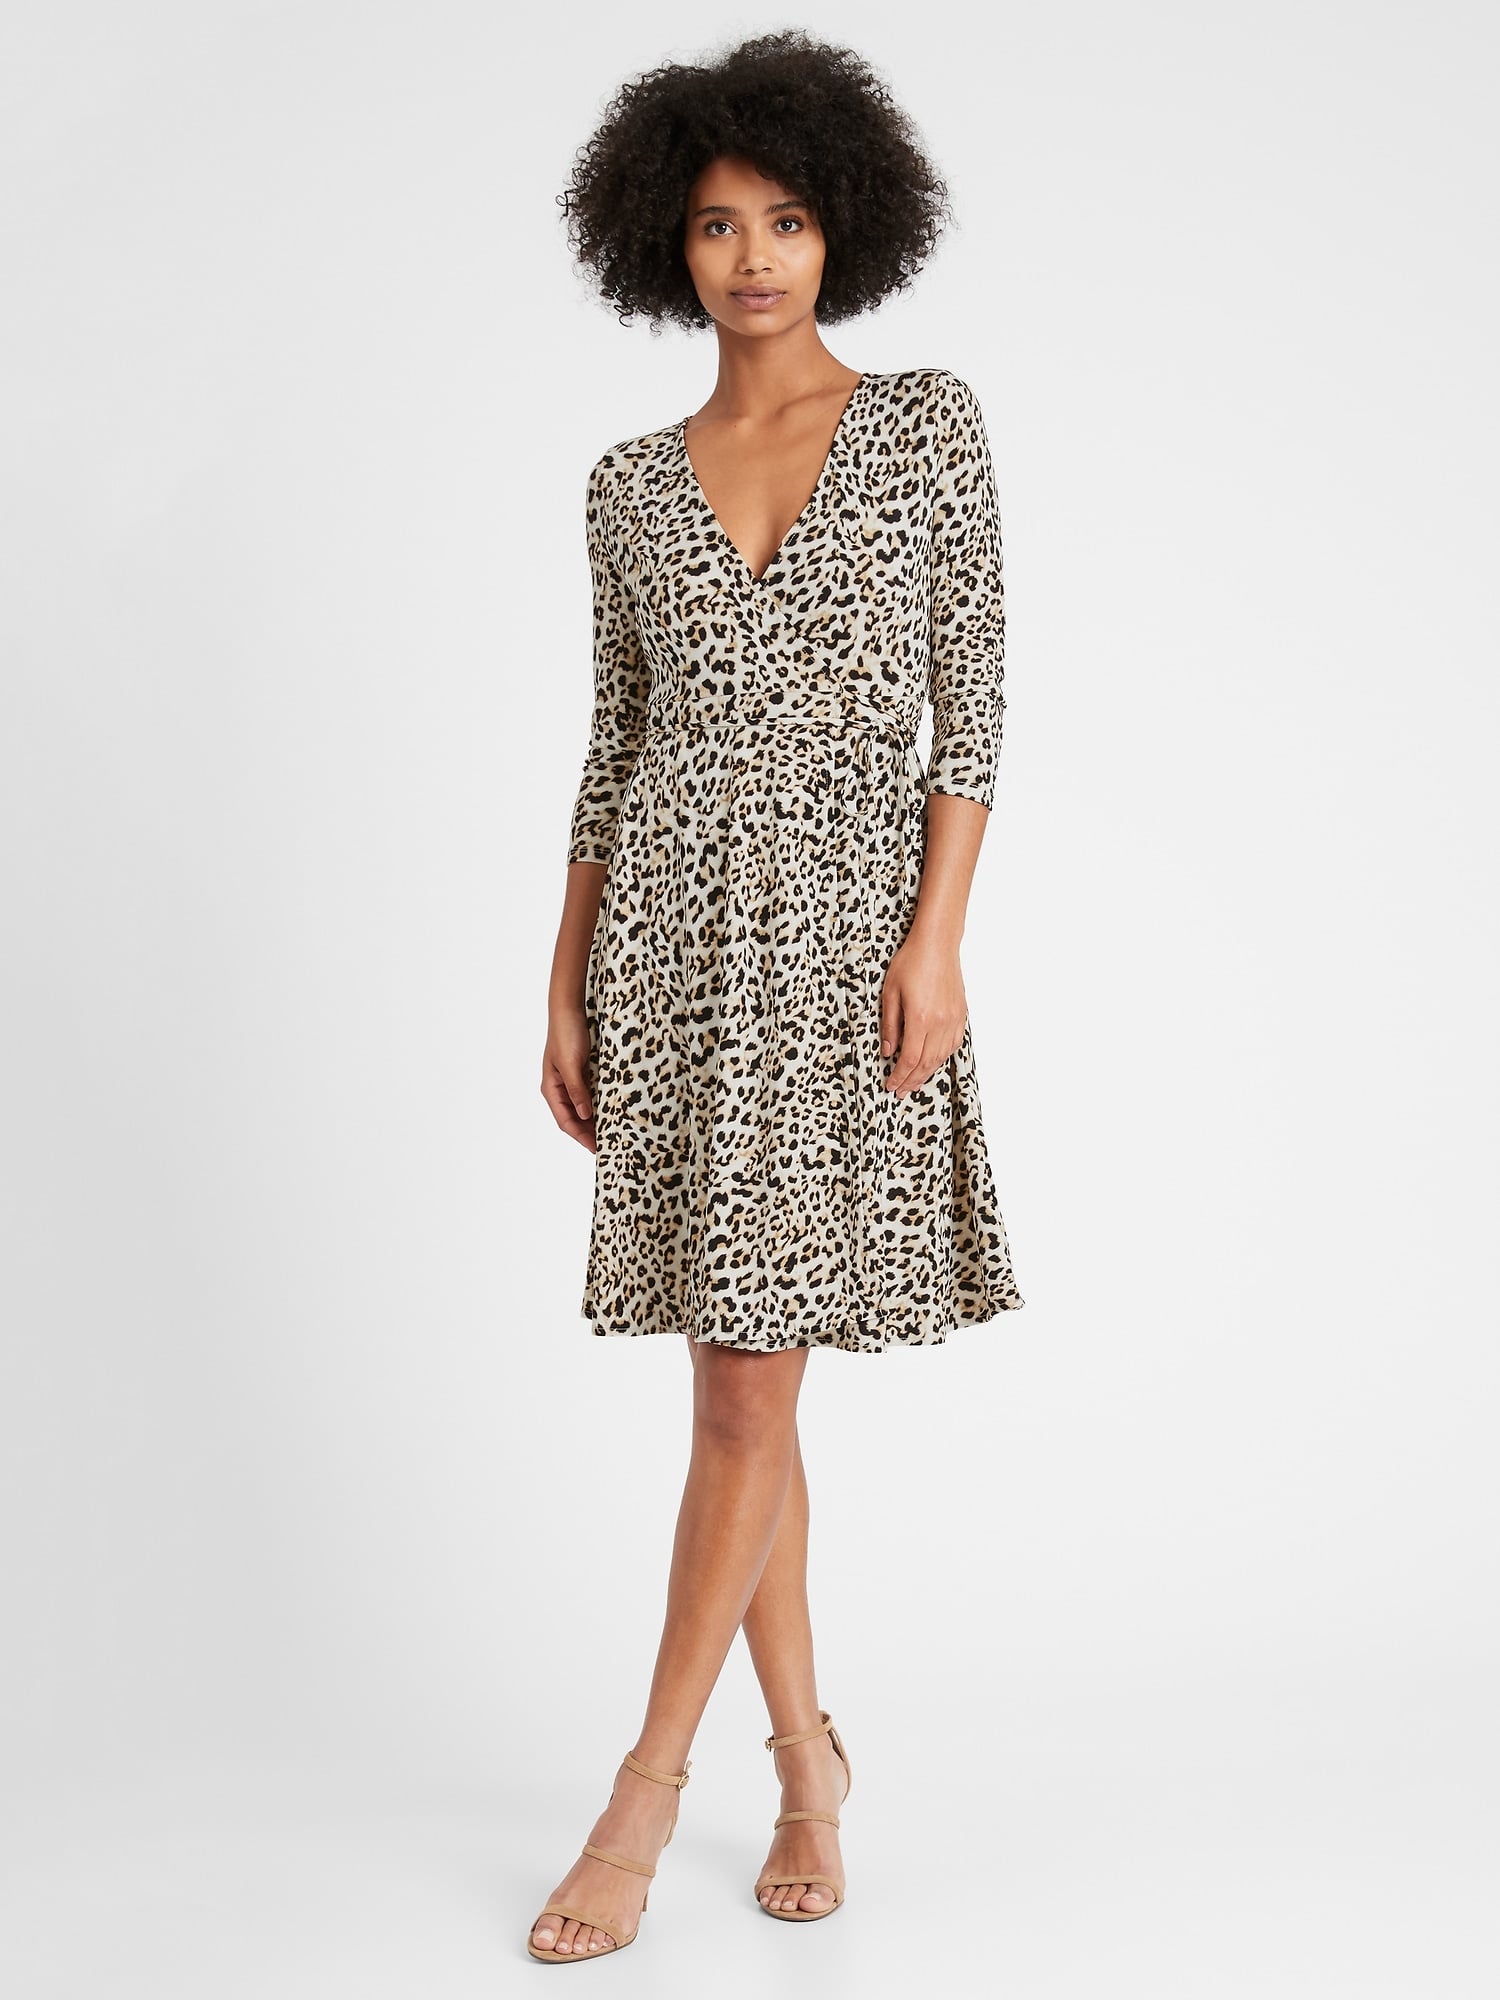 Wrinkle-Resistant Wrap Dress | Best Clothes From Banana Republic Under $50  | POPSUGAR Fashion Photo 4